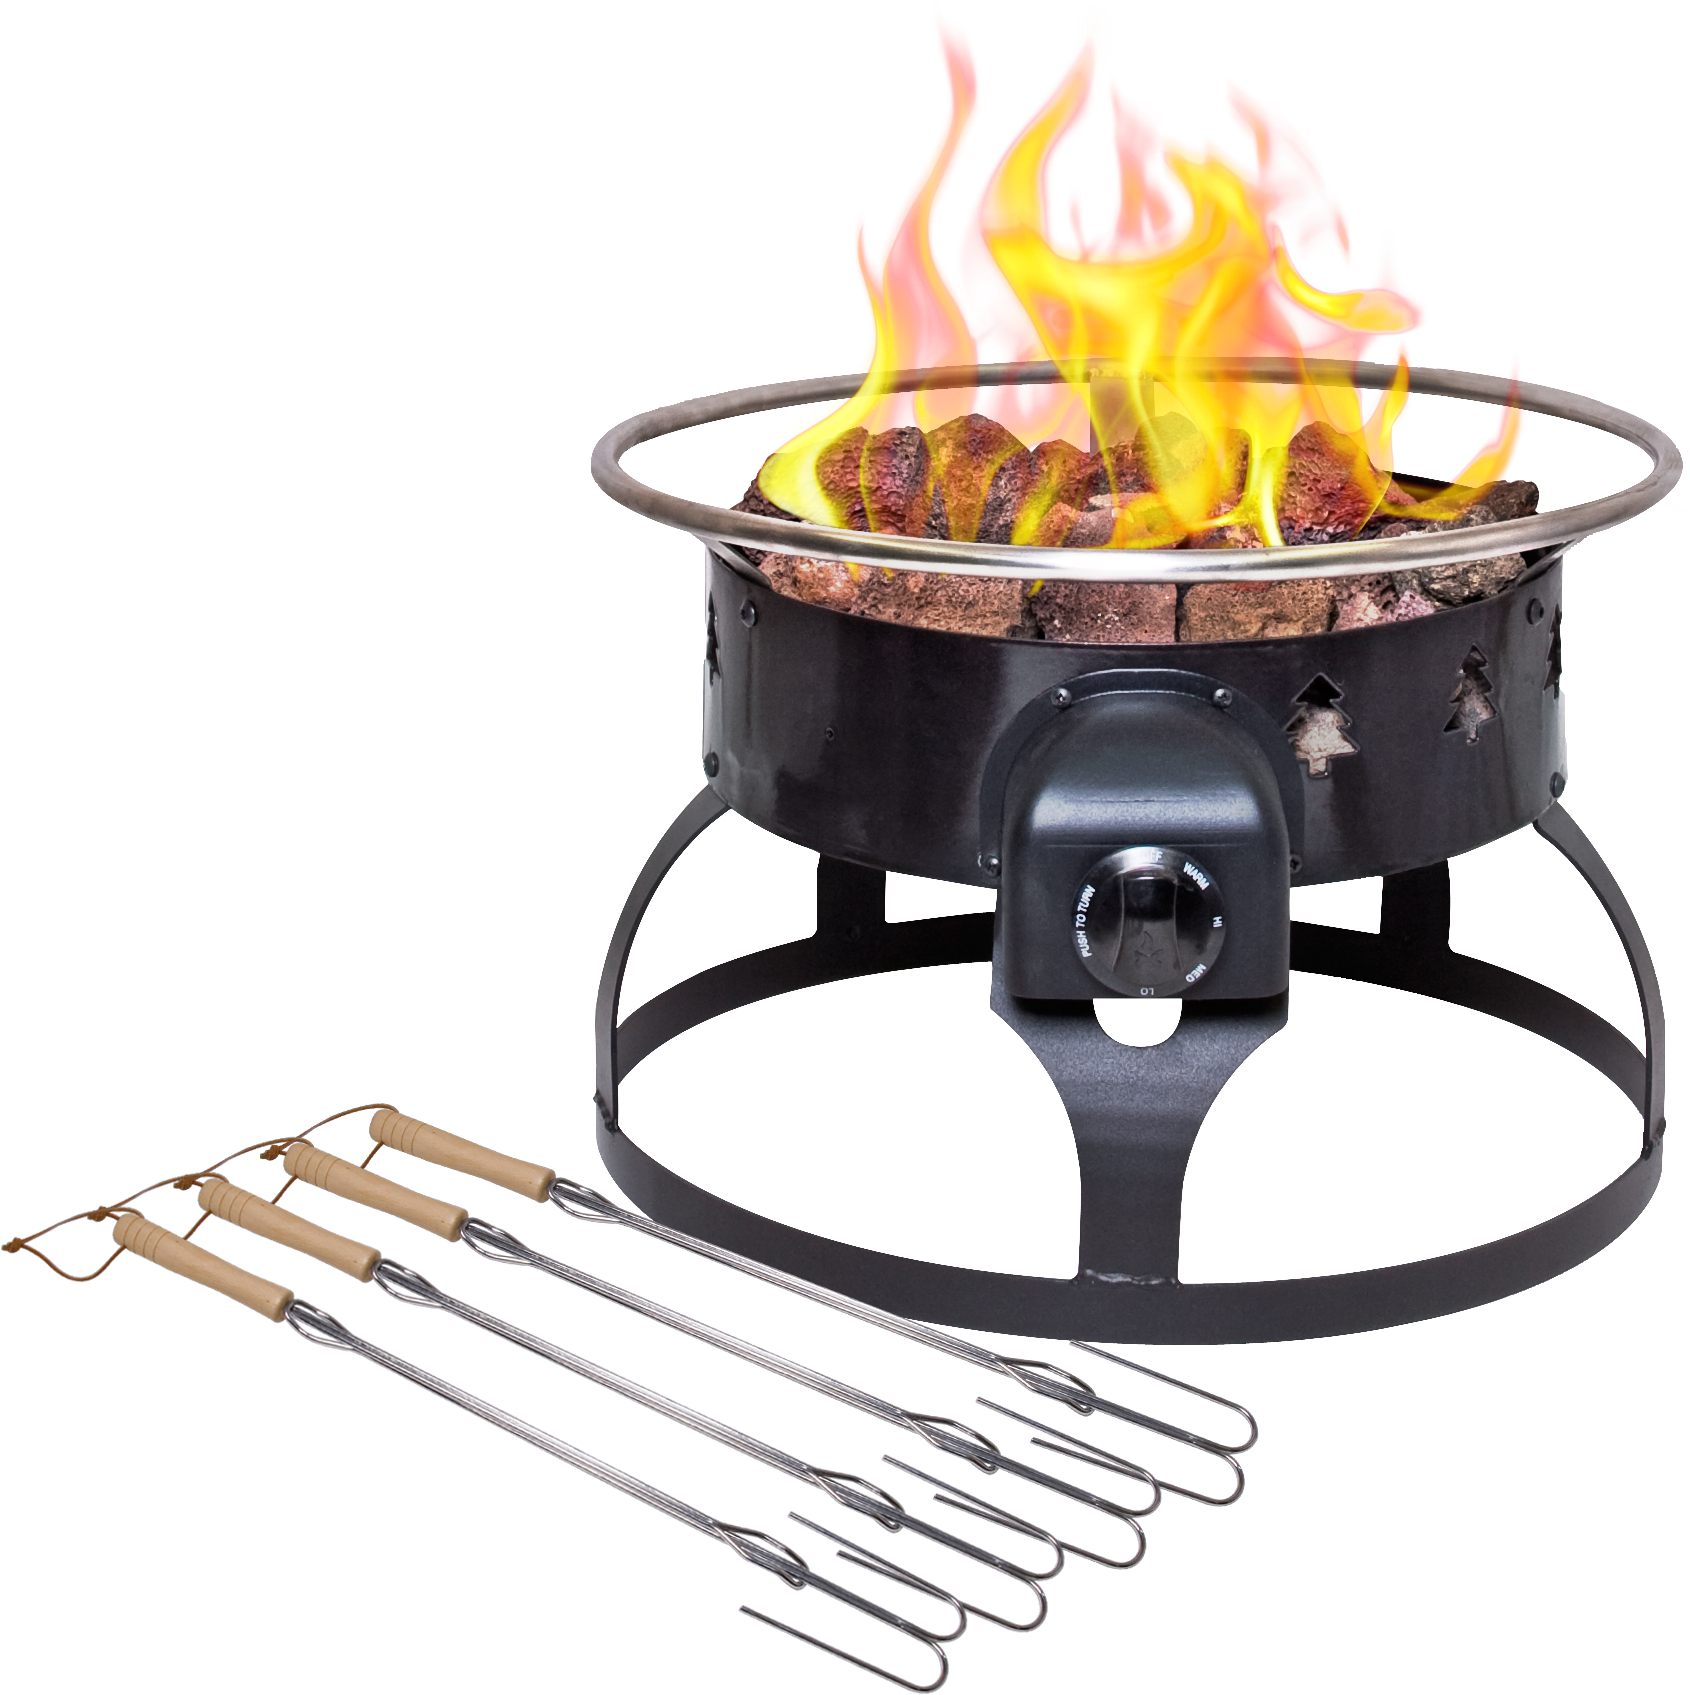 Outdoor Fun View On Website - Portable Propane Fire Pit (2000x2000)